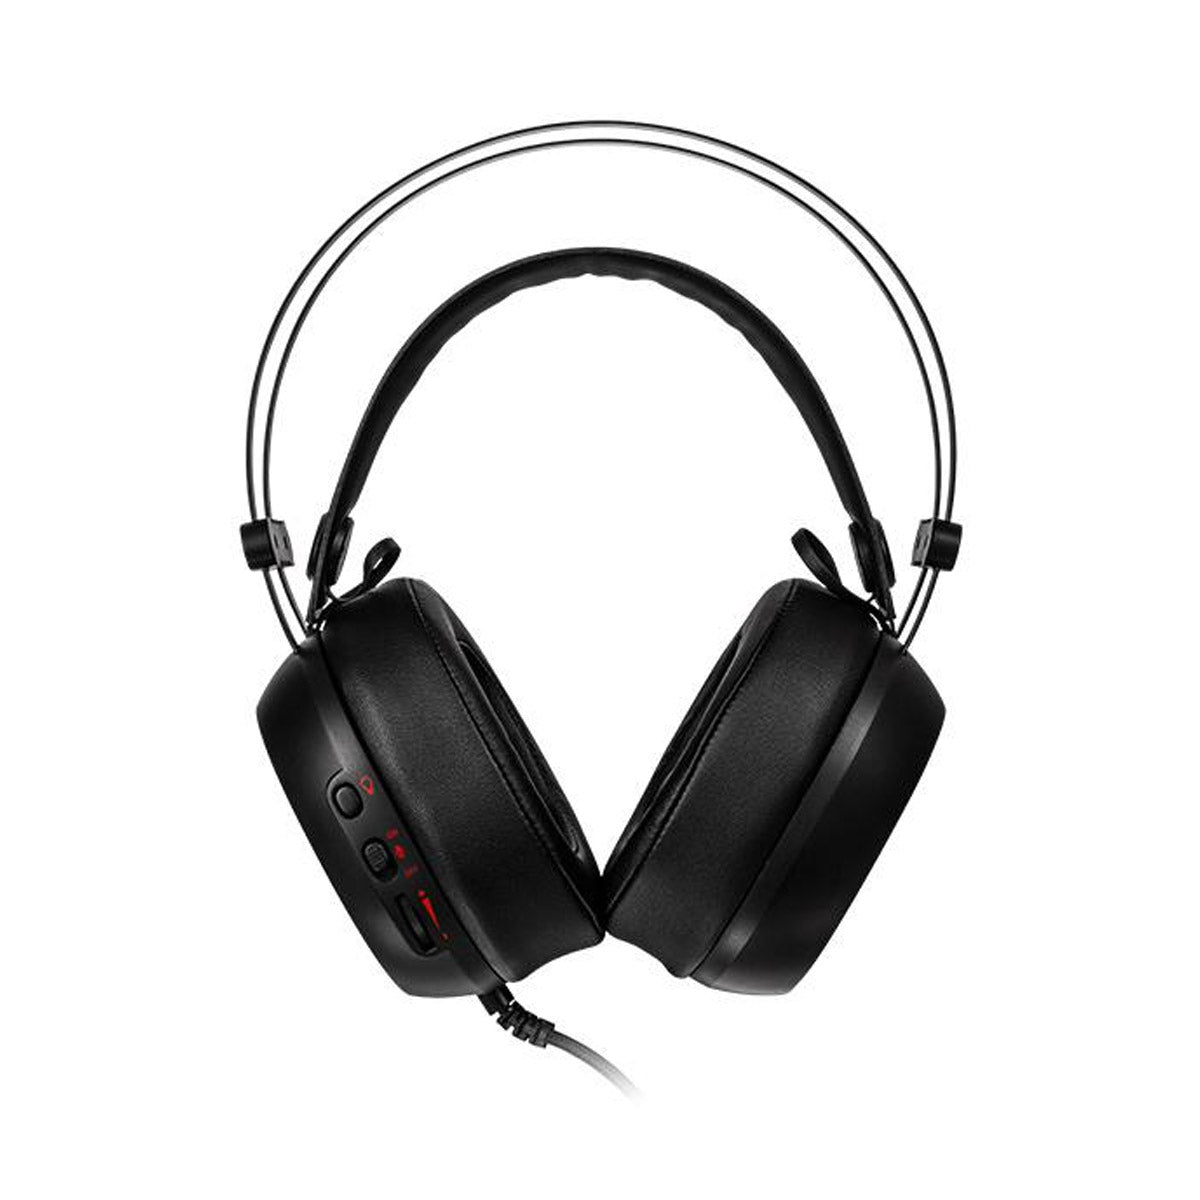 Thermaltake eSports Shock Pro RGB Gaming Headset with 3.5mm Audio Jack 40mm Drivers and Microphone